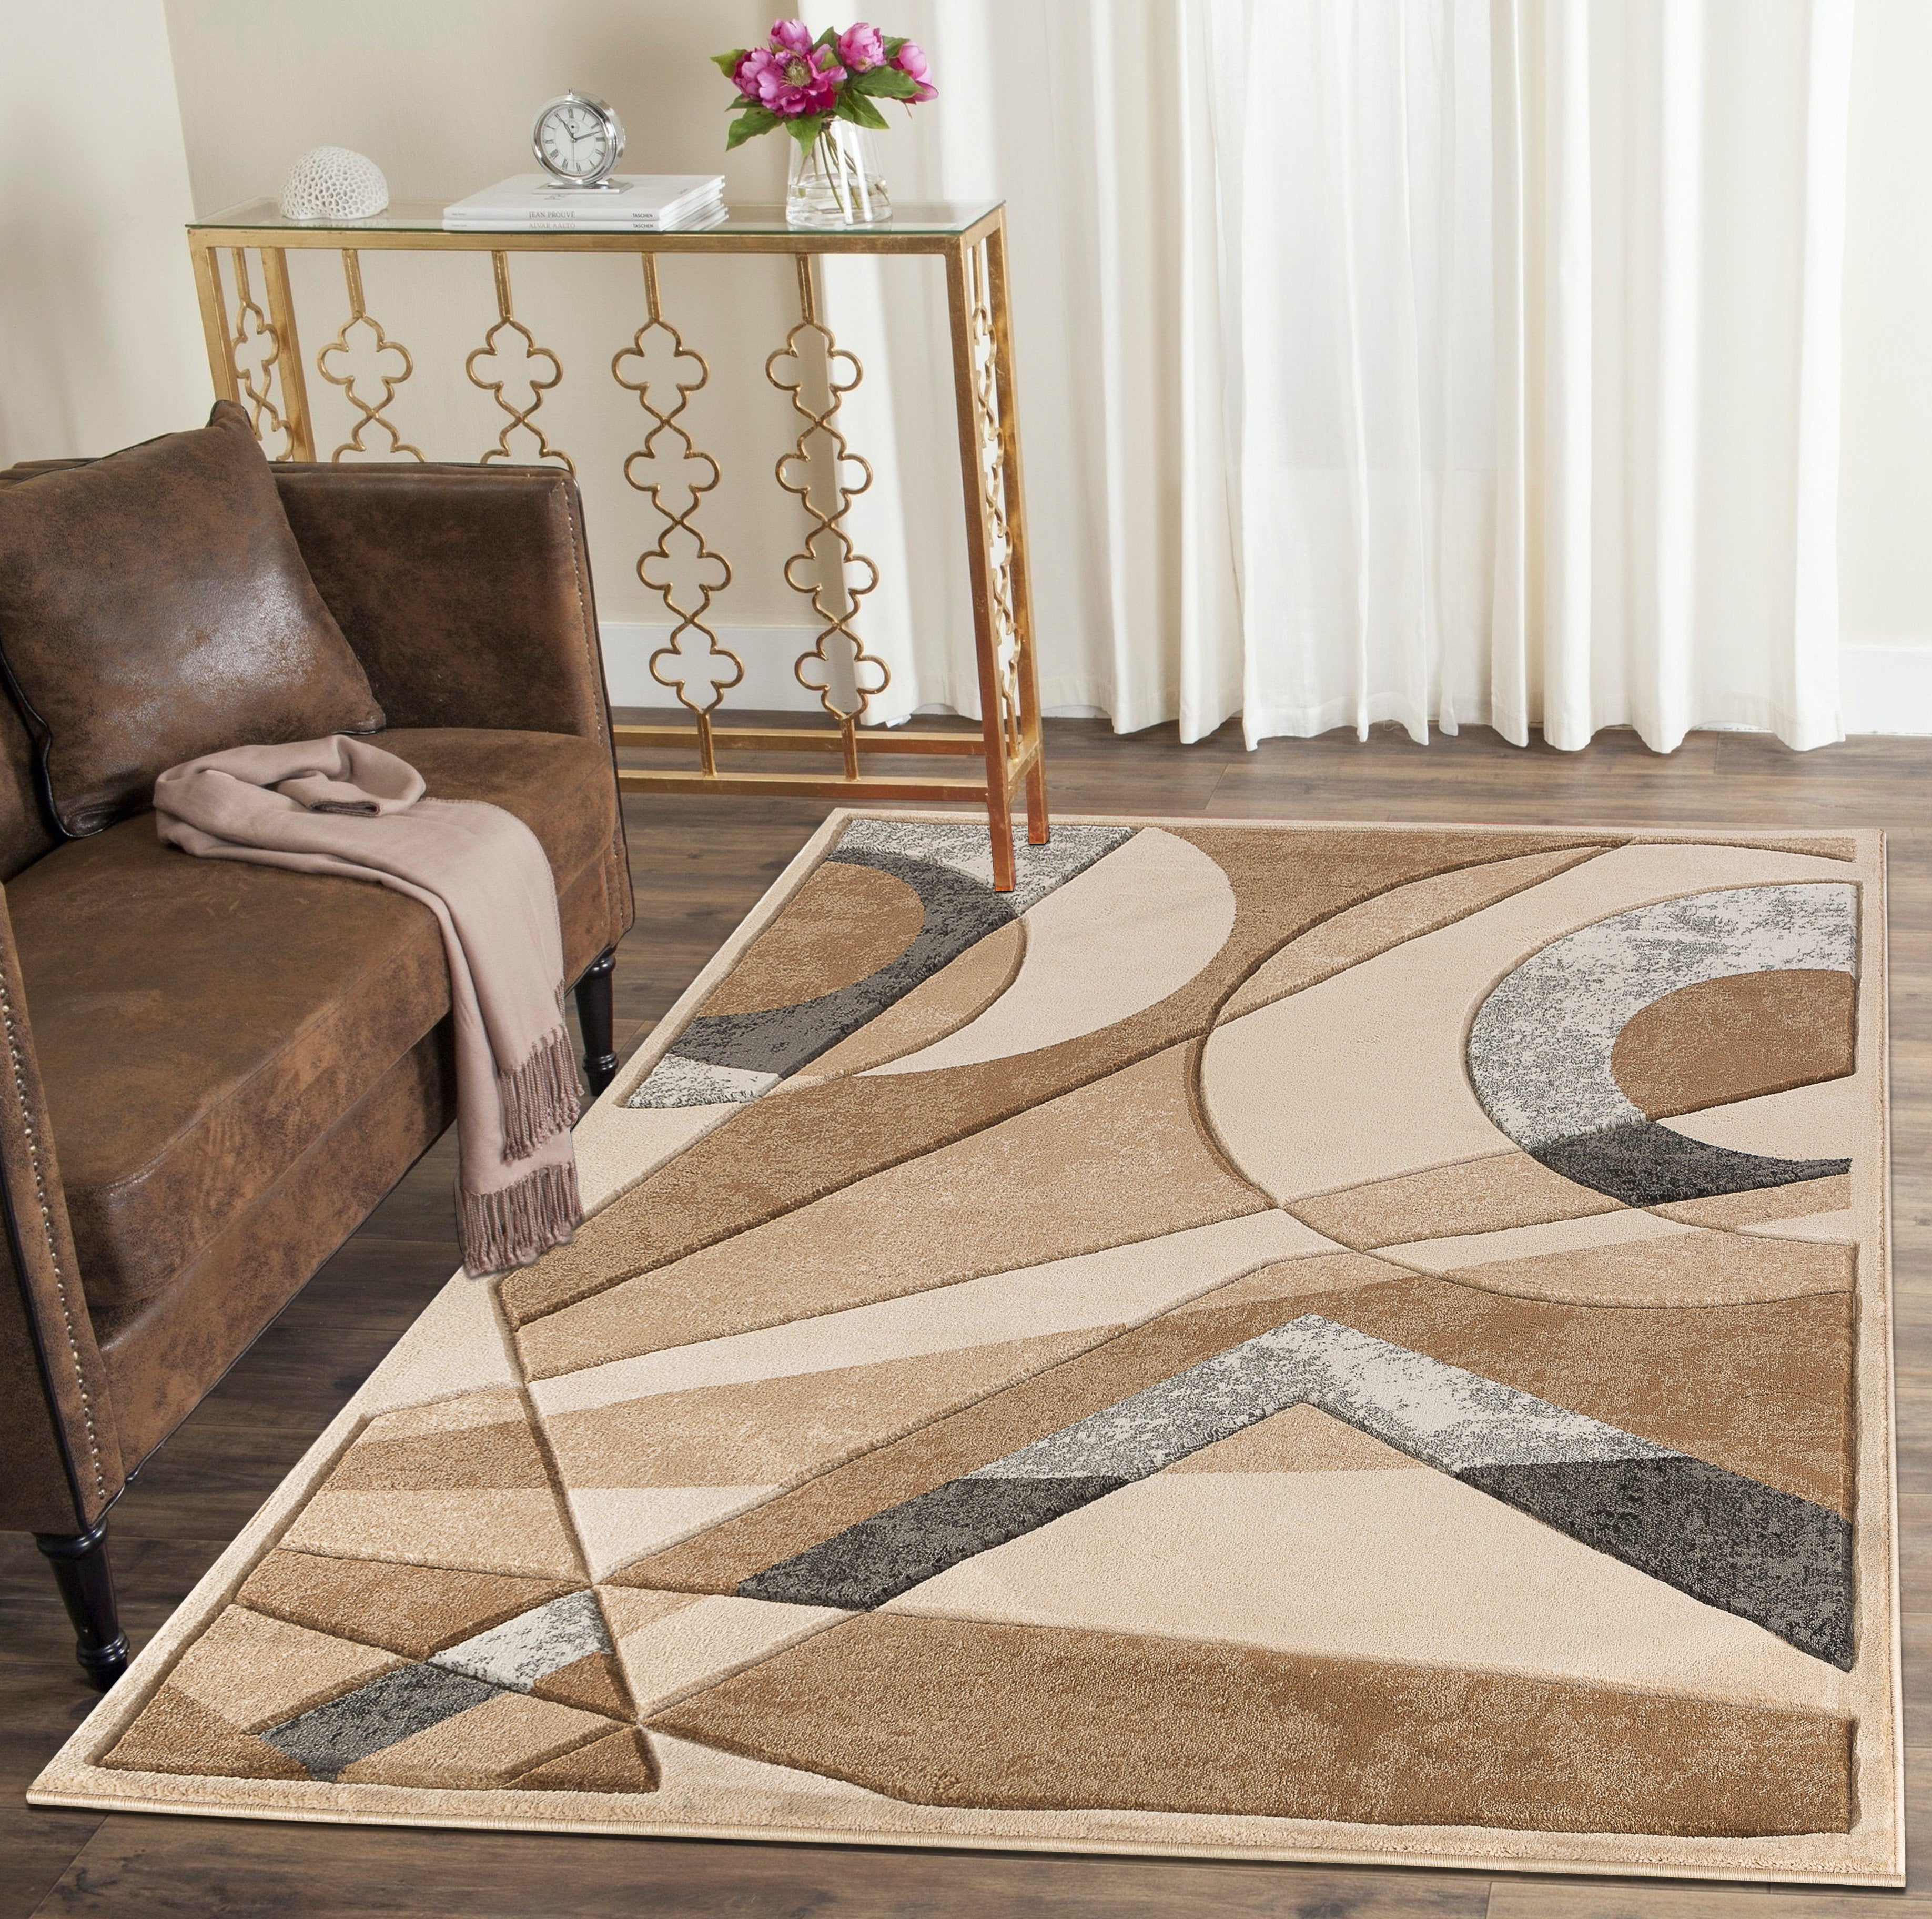 Modern Geometric Shapes Hand Carved, What Shape Area Rug For Living Room